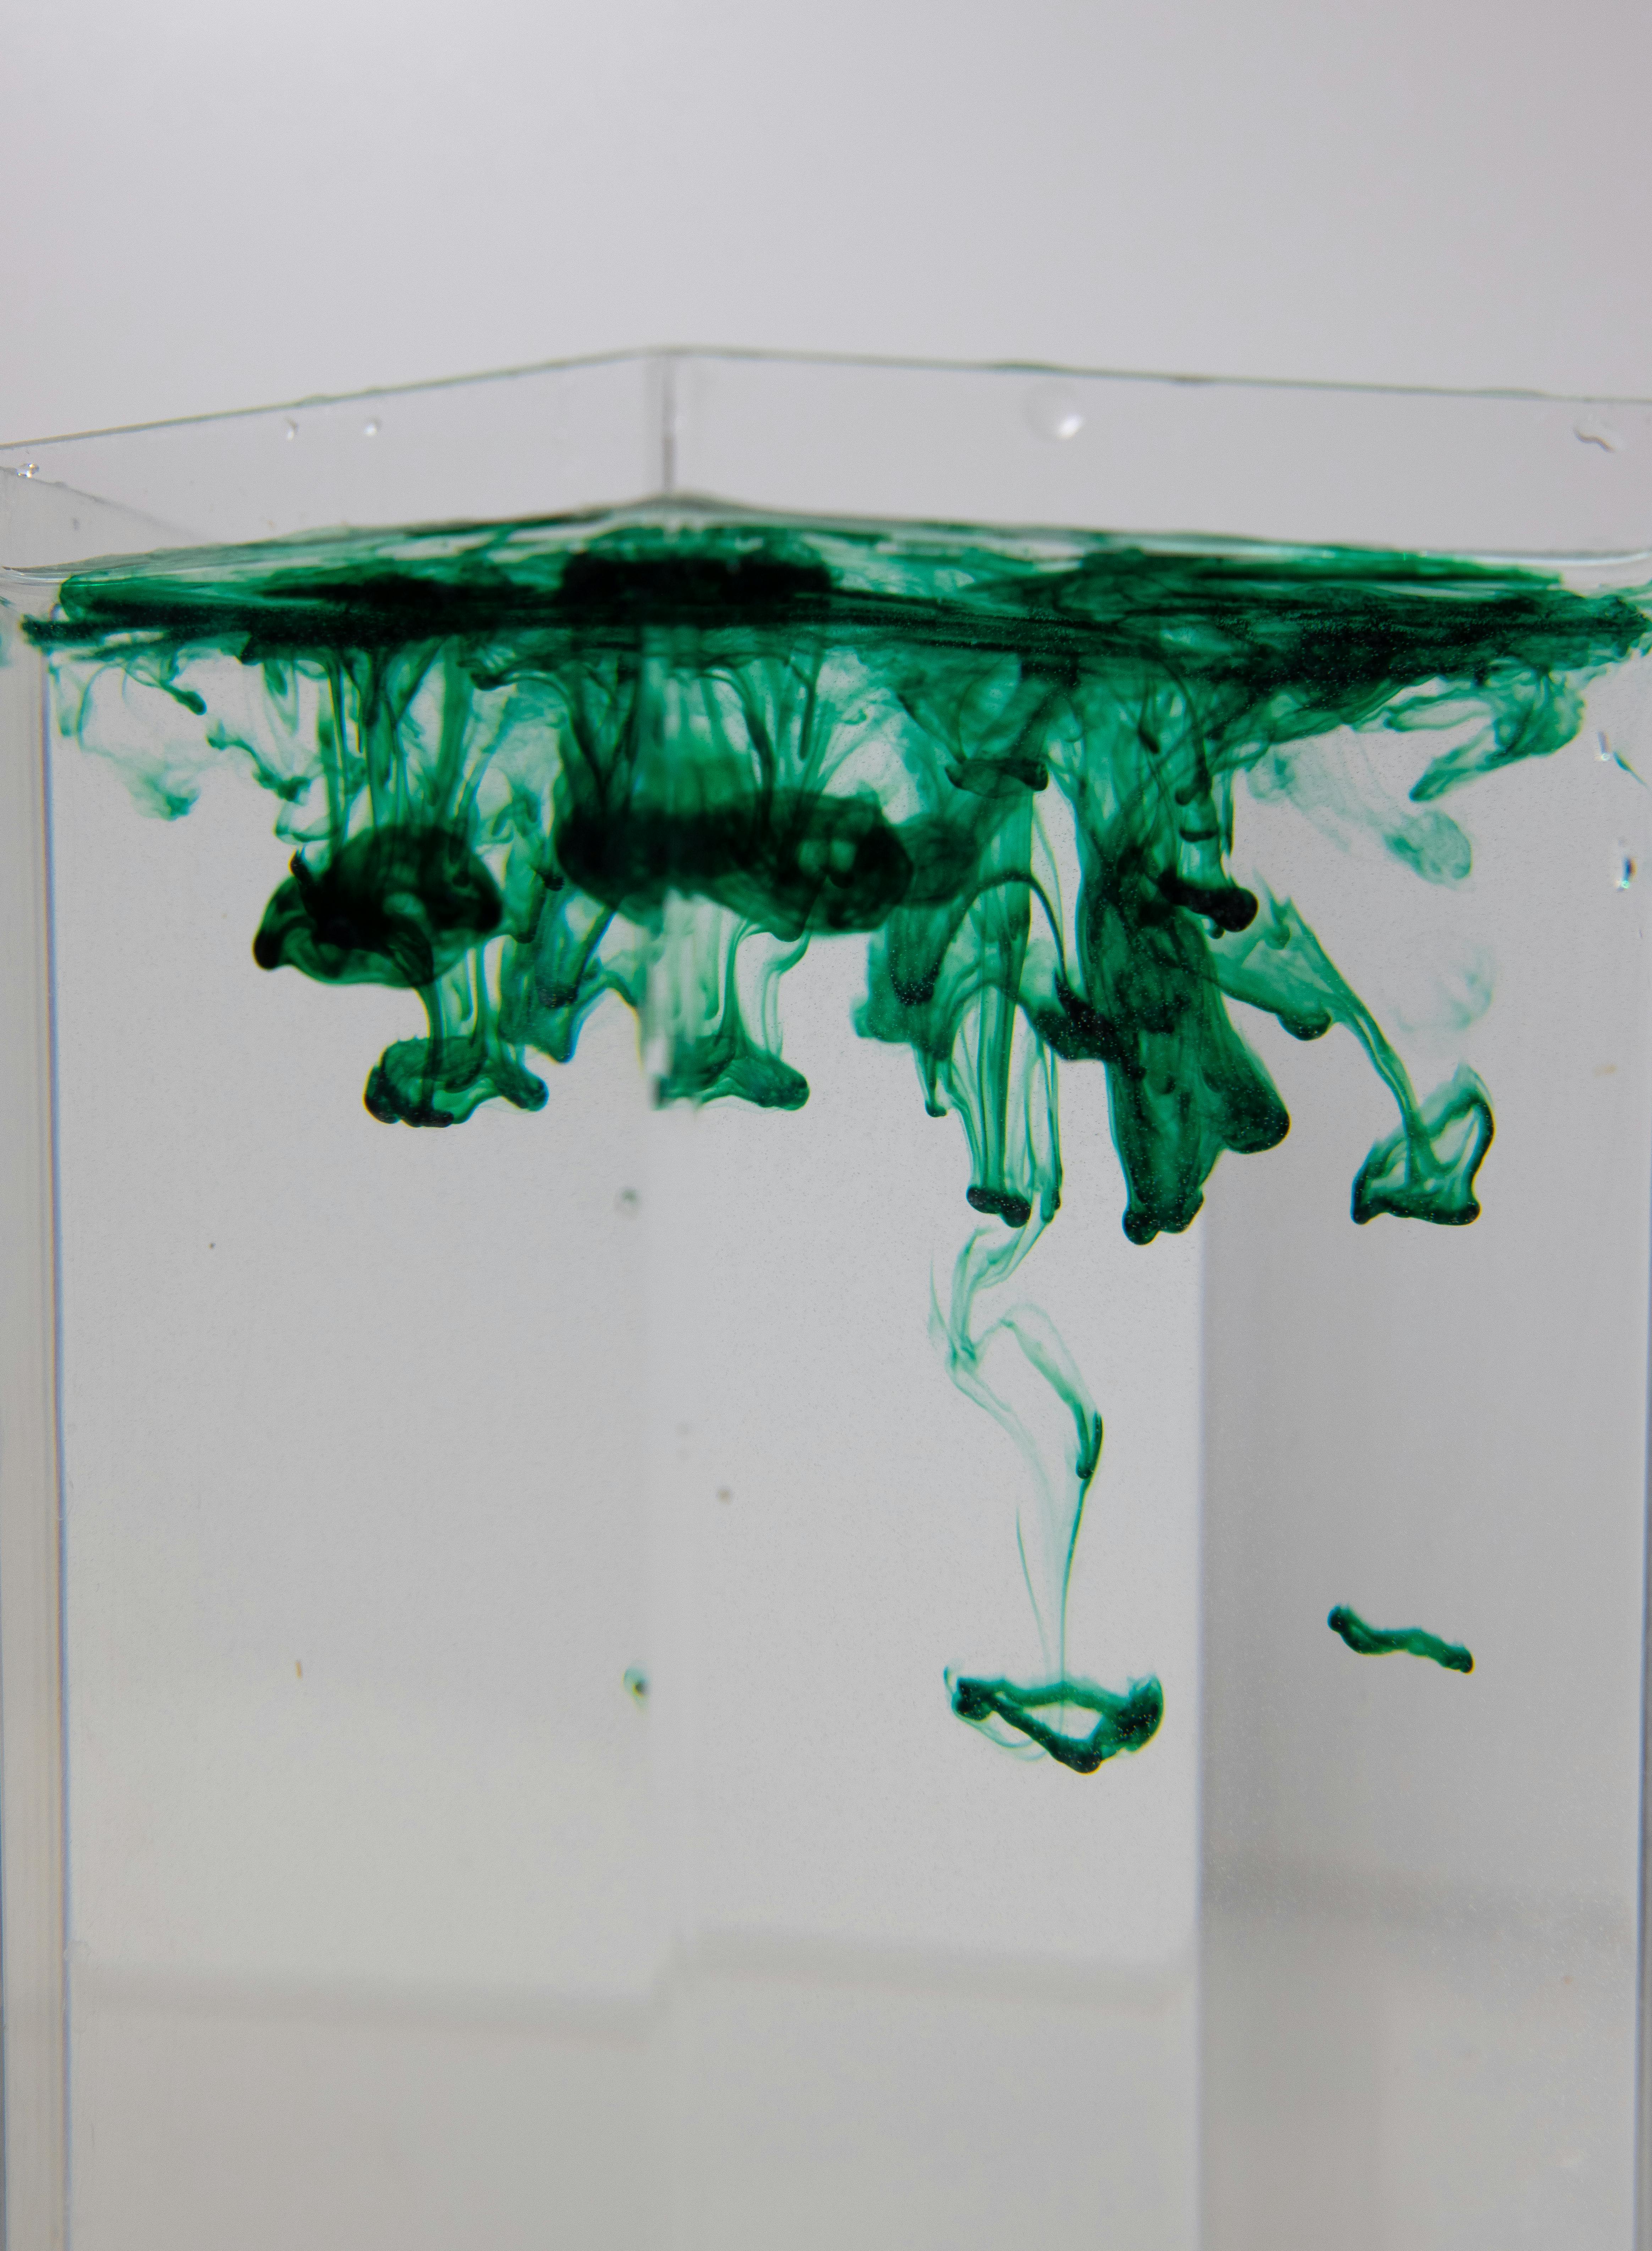 glass with aqua and spreading paint flows